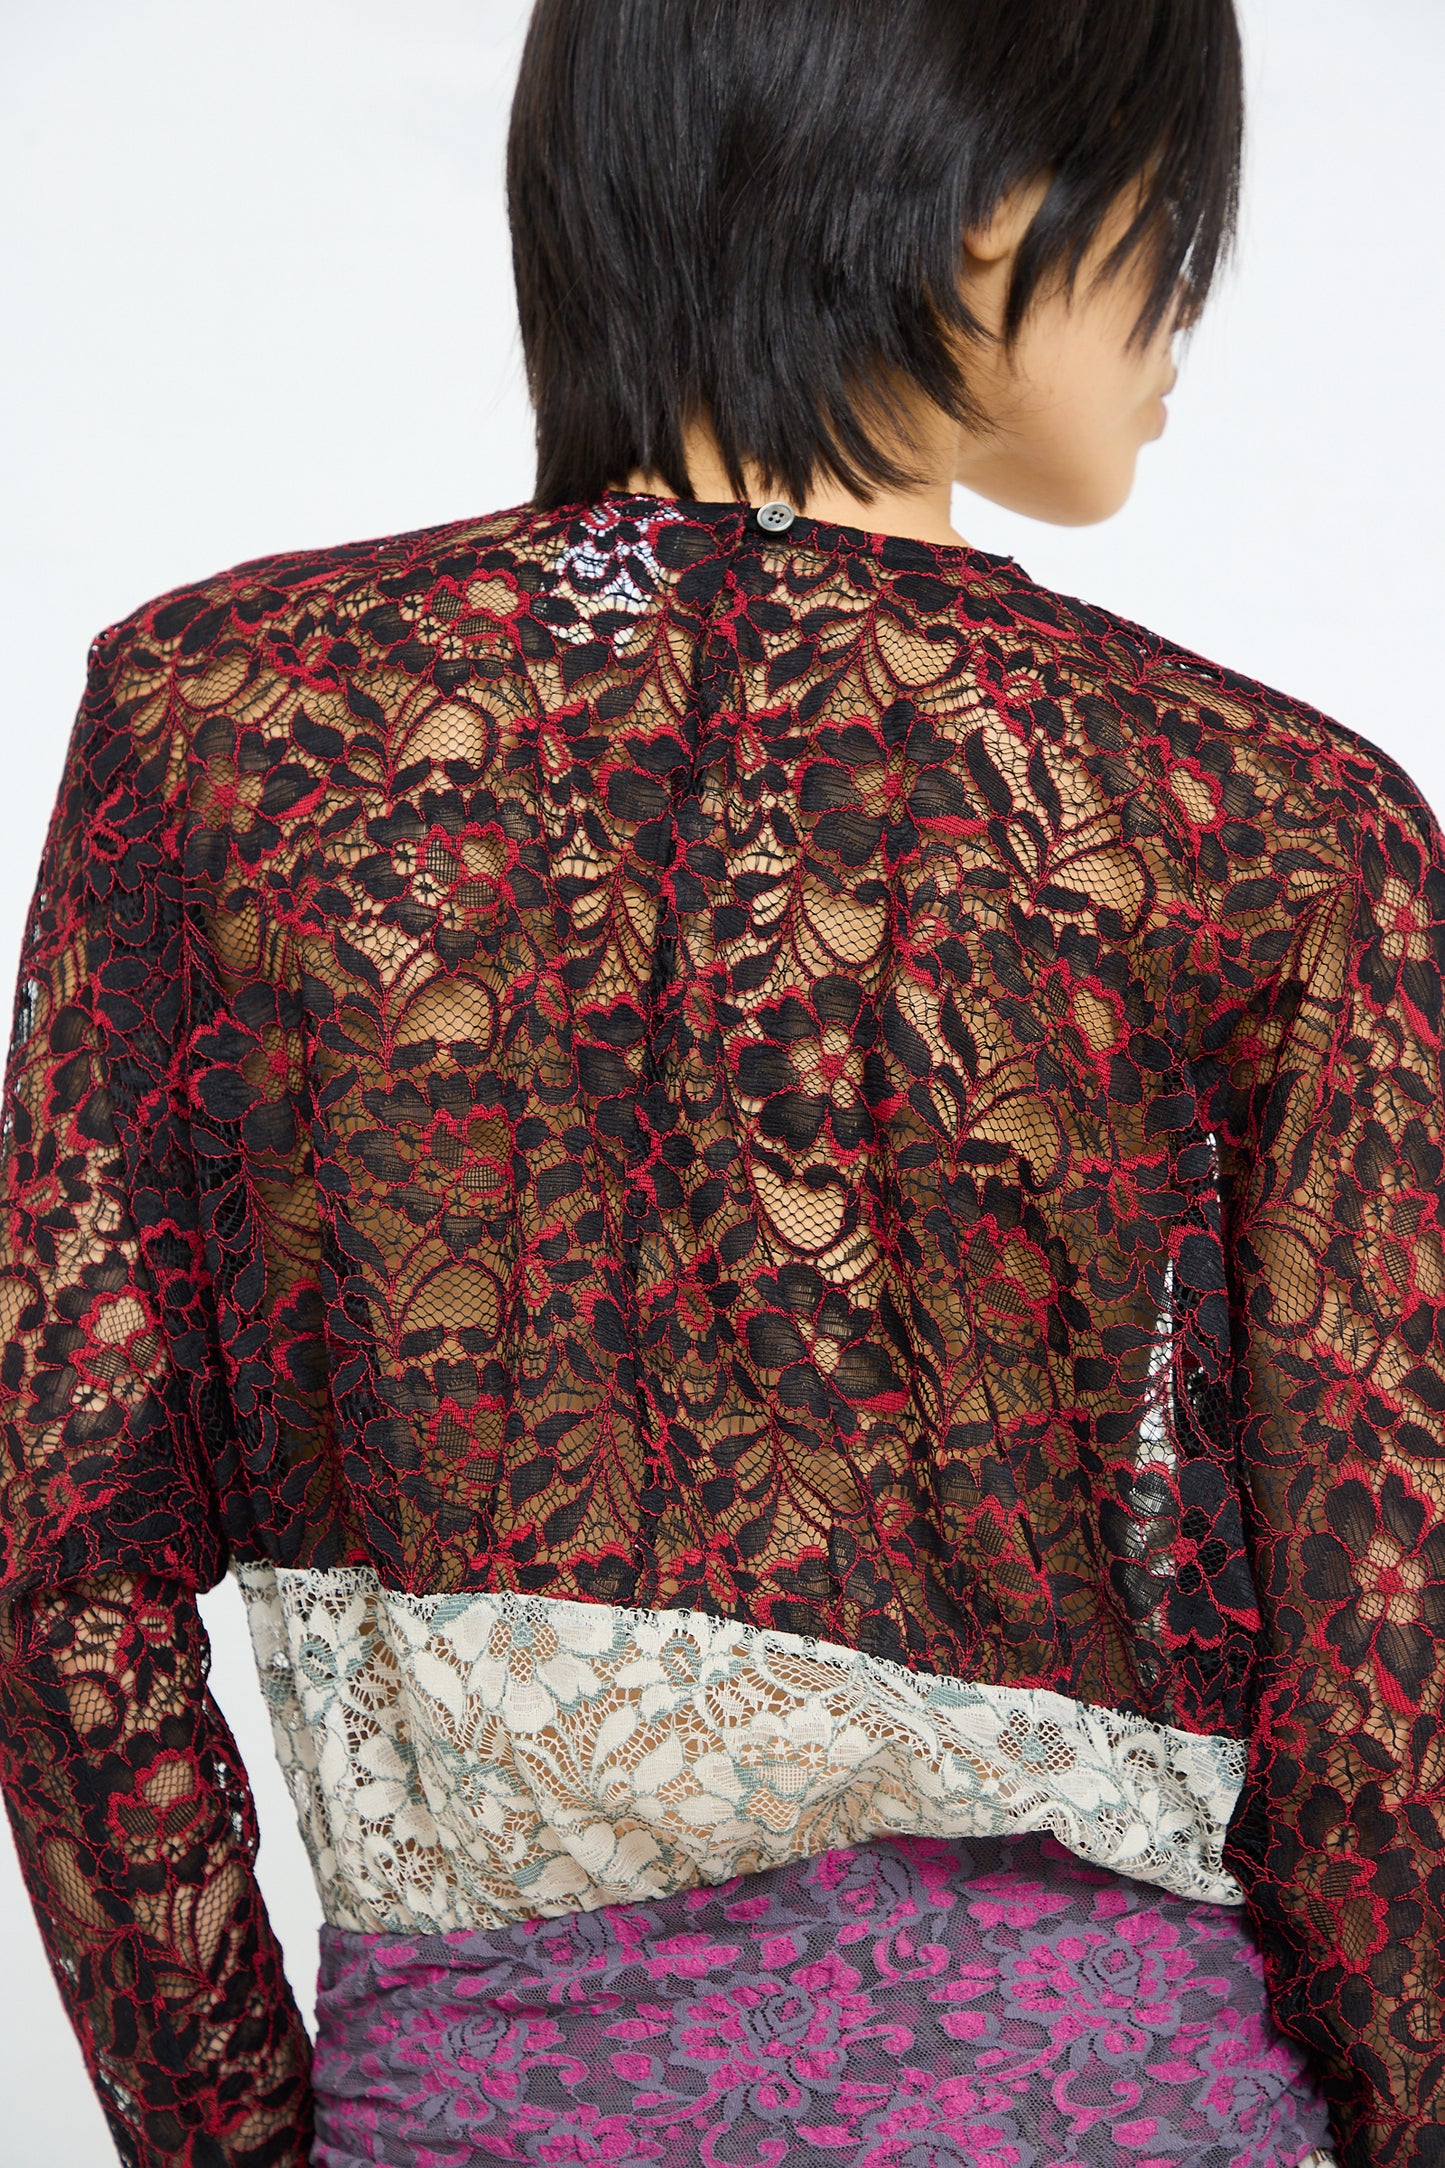 A person wearing a SC103 Lace Ritual Top in Thrash with floral patterns, paired with a brightly patterned garment below.